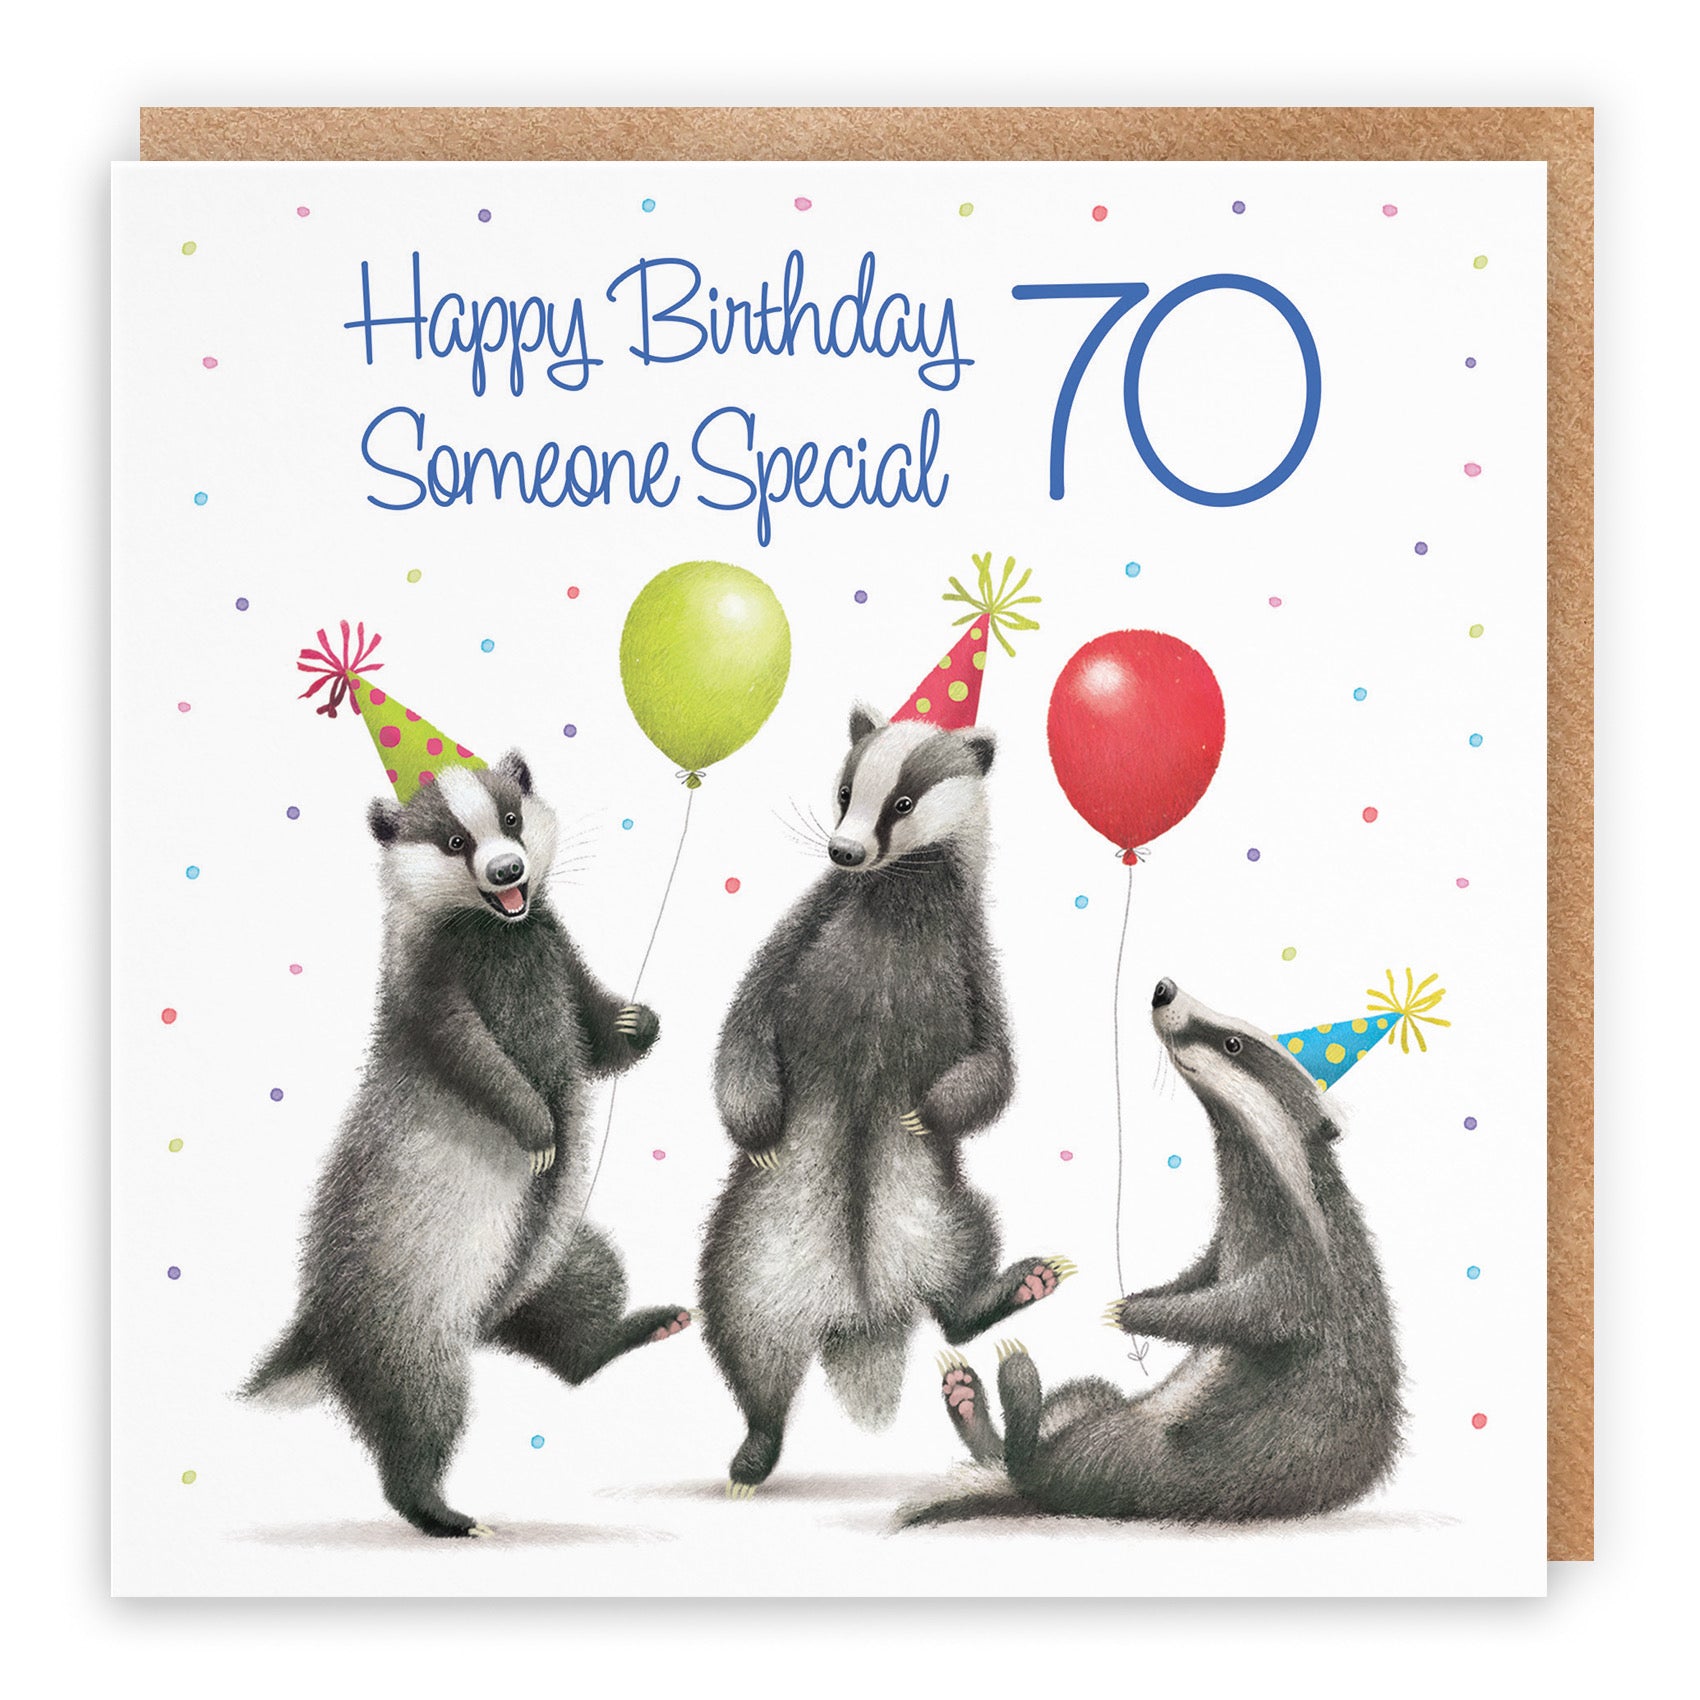 70th Someone Special Badgers Birthday Card Milo's Gallery - Default Title (B0CRXSZWGW)